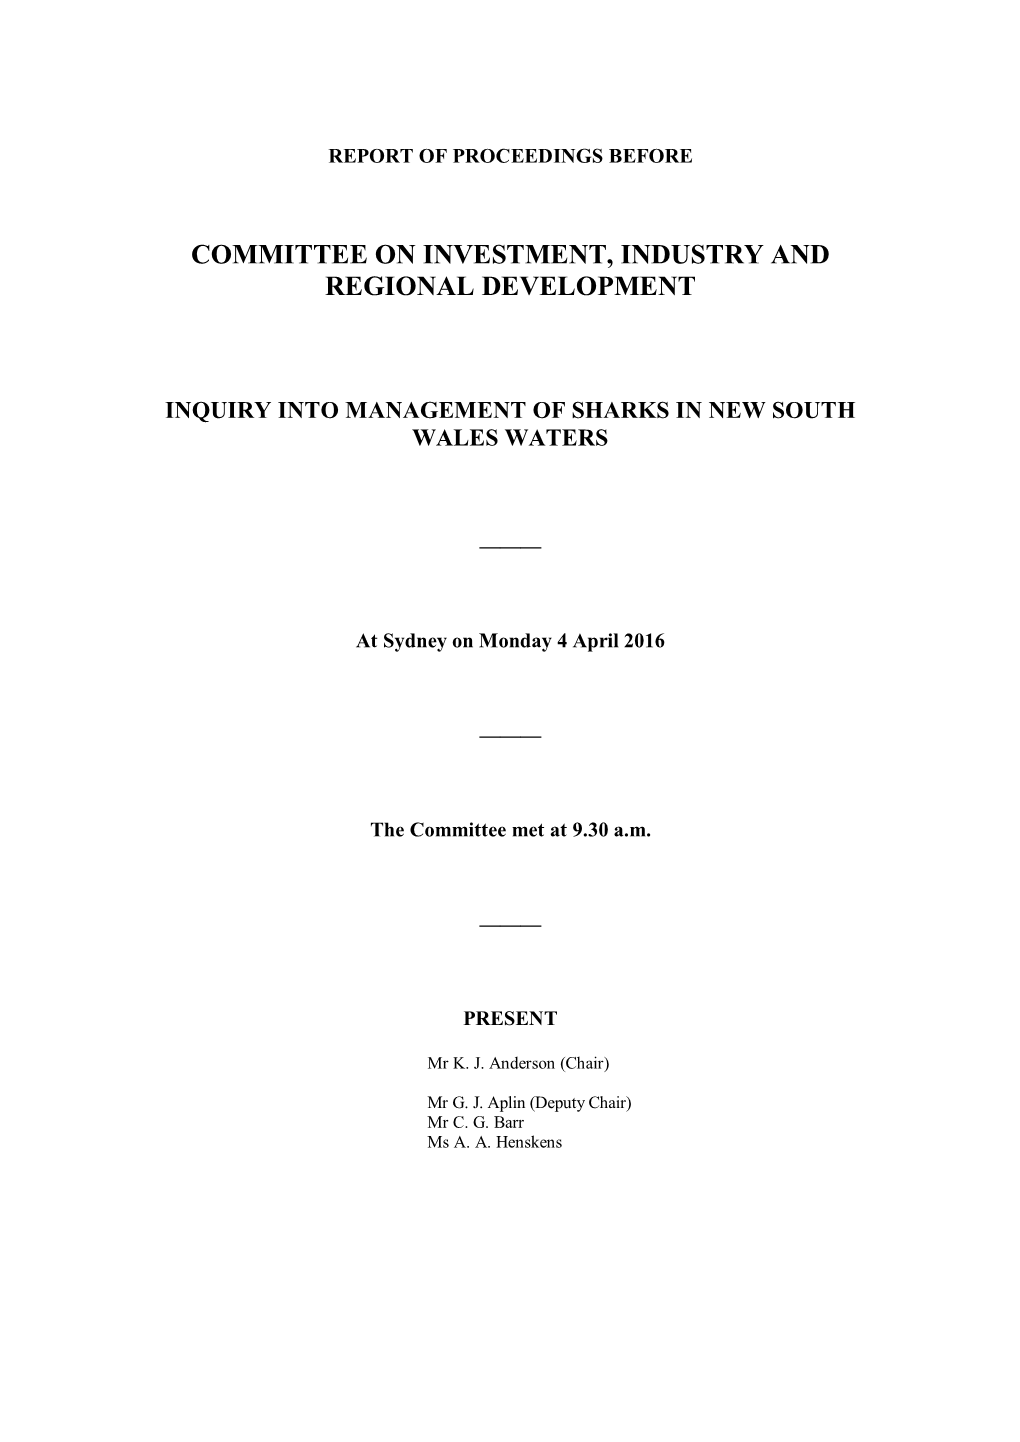 Committee on Investment, Industry and Regional Development